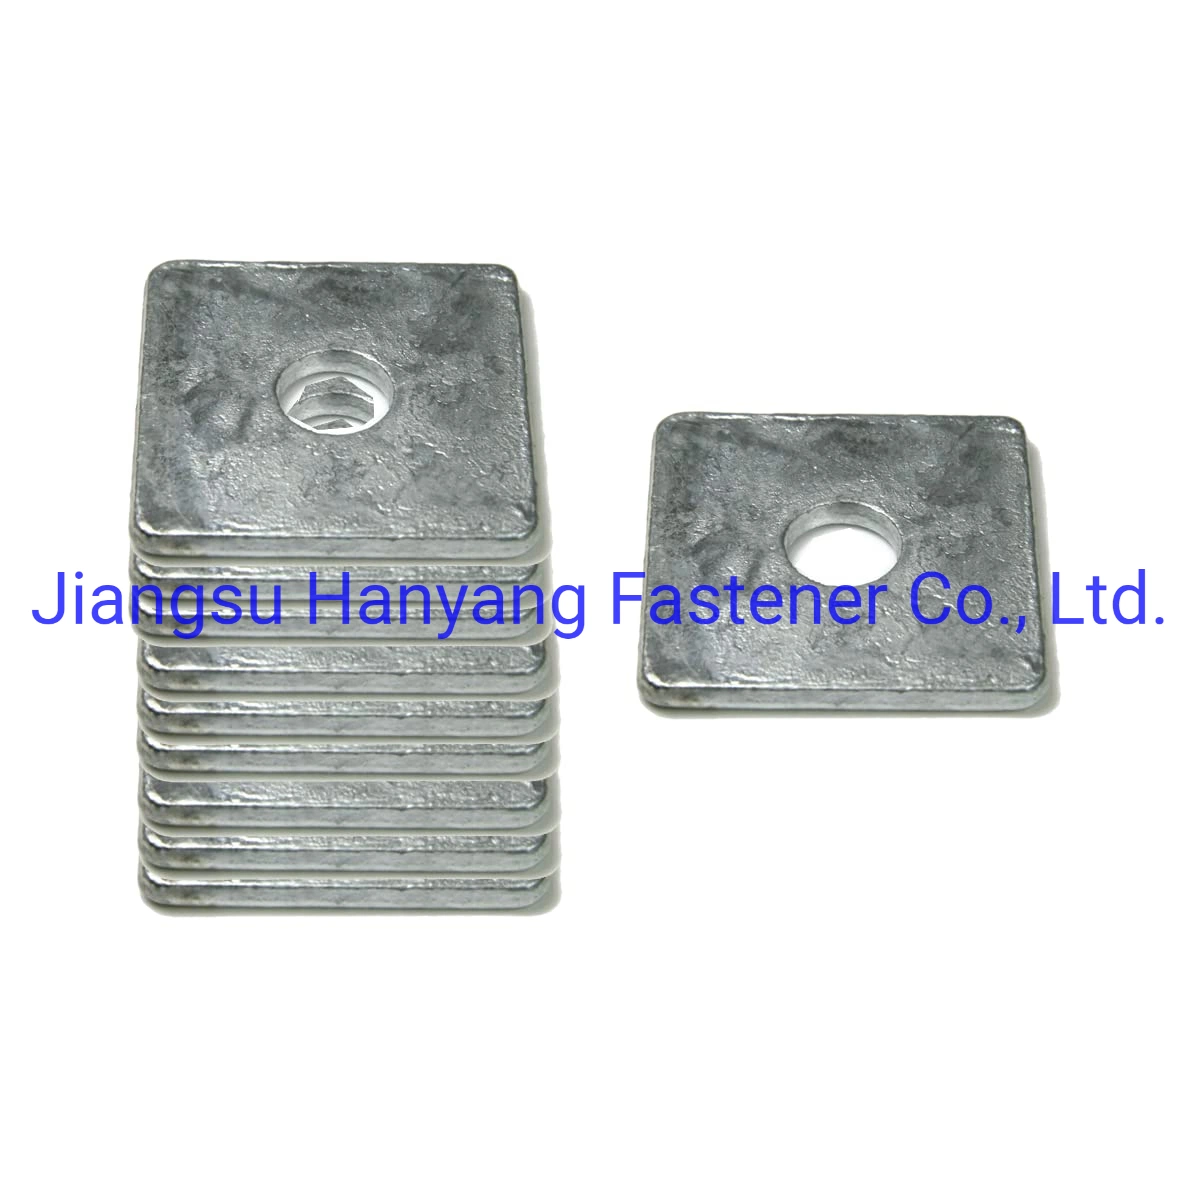 Square Washers Galvanized Steel Gasket Nut Flat Pad Spacer